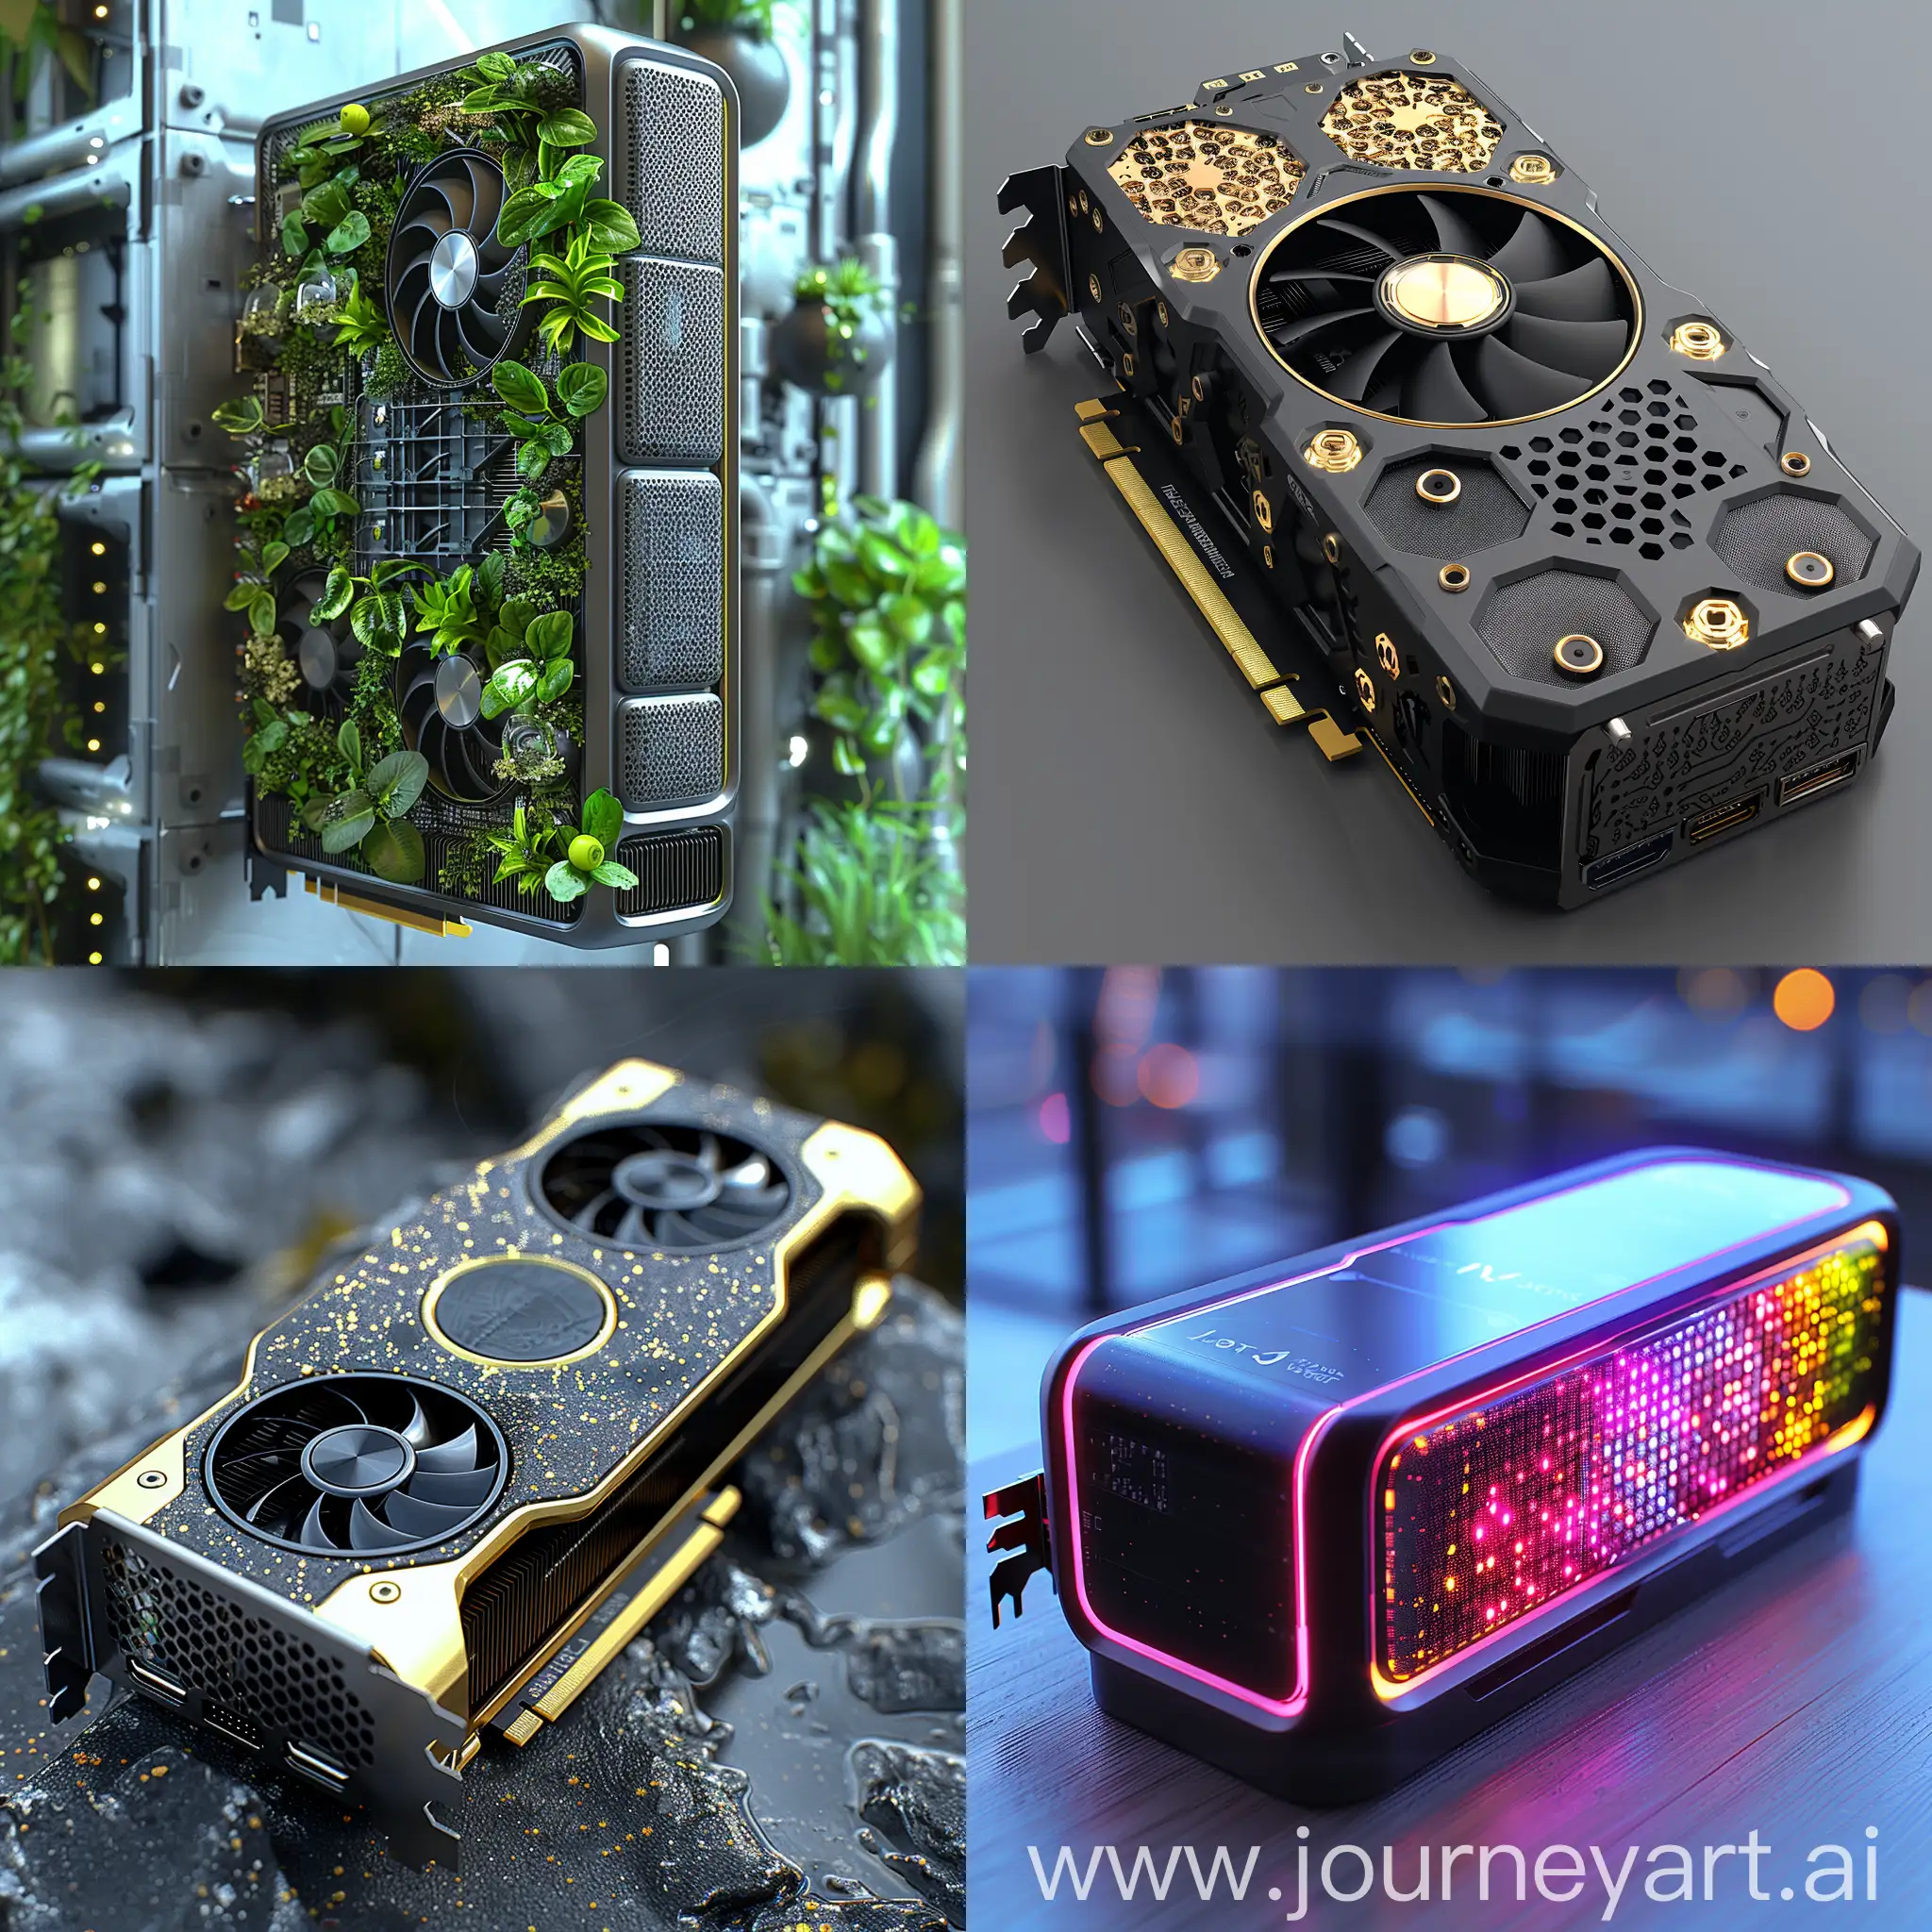 Ultramodern, futuristic PC graphics card, Biodegradable Materials, Lower Power Consumption, Passive Cooling, Smart Power Managemen, Underclocking Capabilities, Cloud Gaming Support, Modular Design, Recycled Materials, Energy-Efficient Manufacturing, Longer Lifespan, Solar Panels, Piezoelectric Technology, Kinetic Energy Harvesting, Waste Heat Capture, Radio Frequency (RF) Energy Harvesting, Water Cooling with Self-Contained Reservoir, Micro Wind Turbines, Improved Power Delivery, AI-powered Optimization, Cloud-based Power Management, octane render --stylize 1000